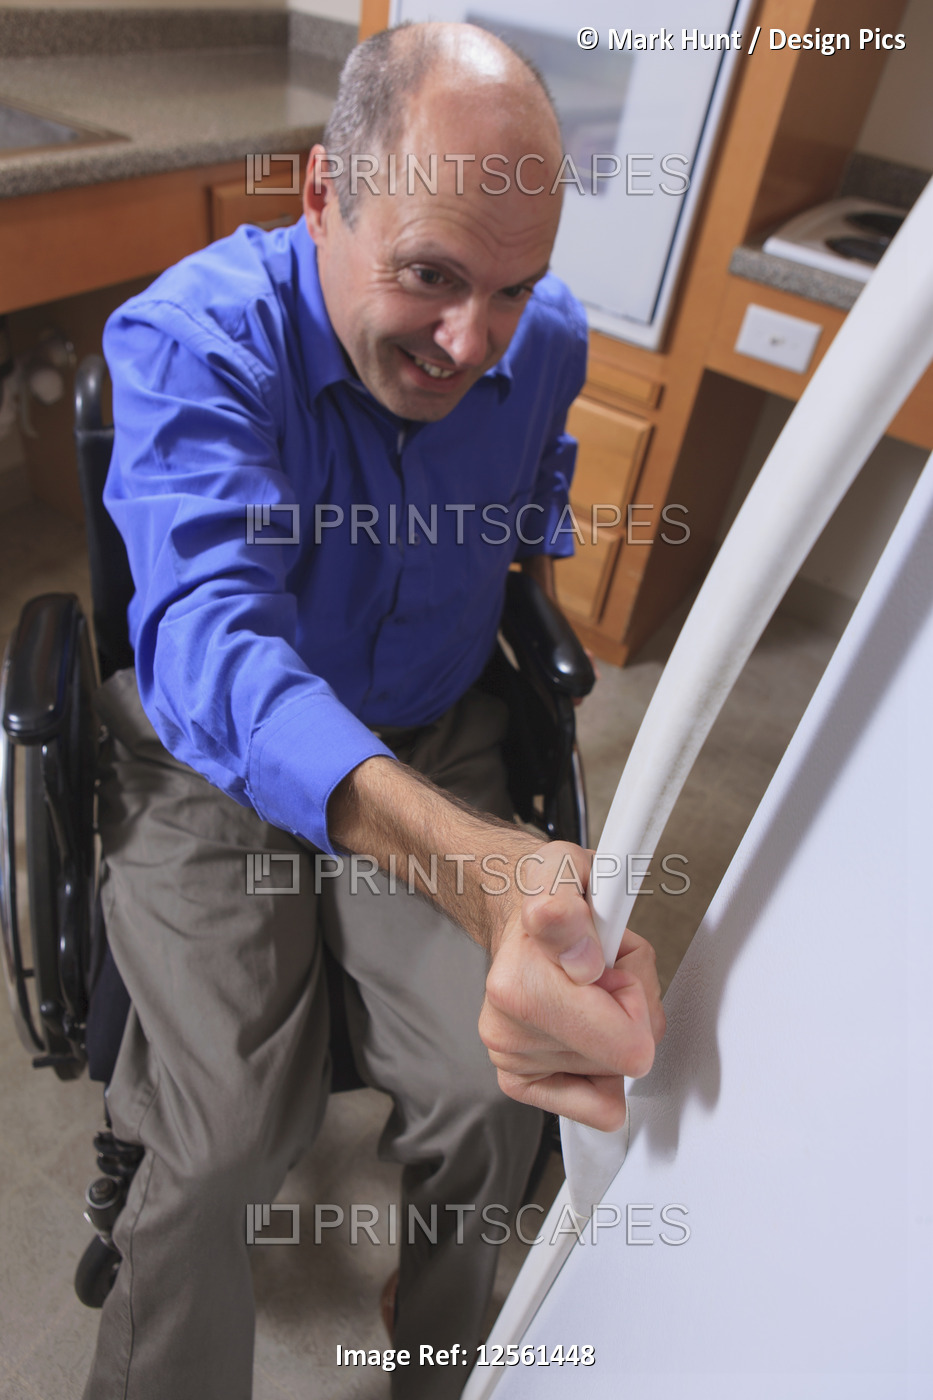 Man with Friedreich's Ataxia and deformed hands using his refrigerator